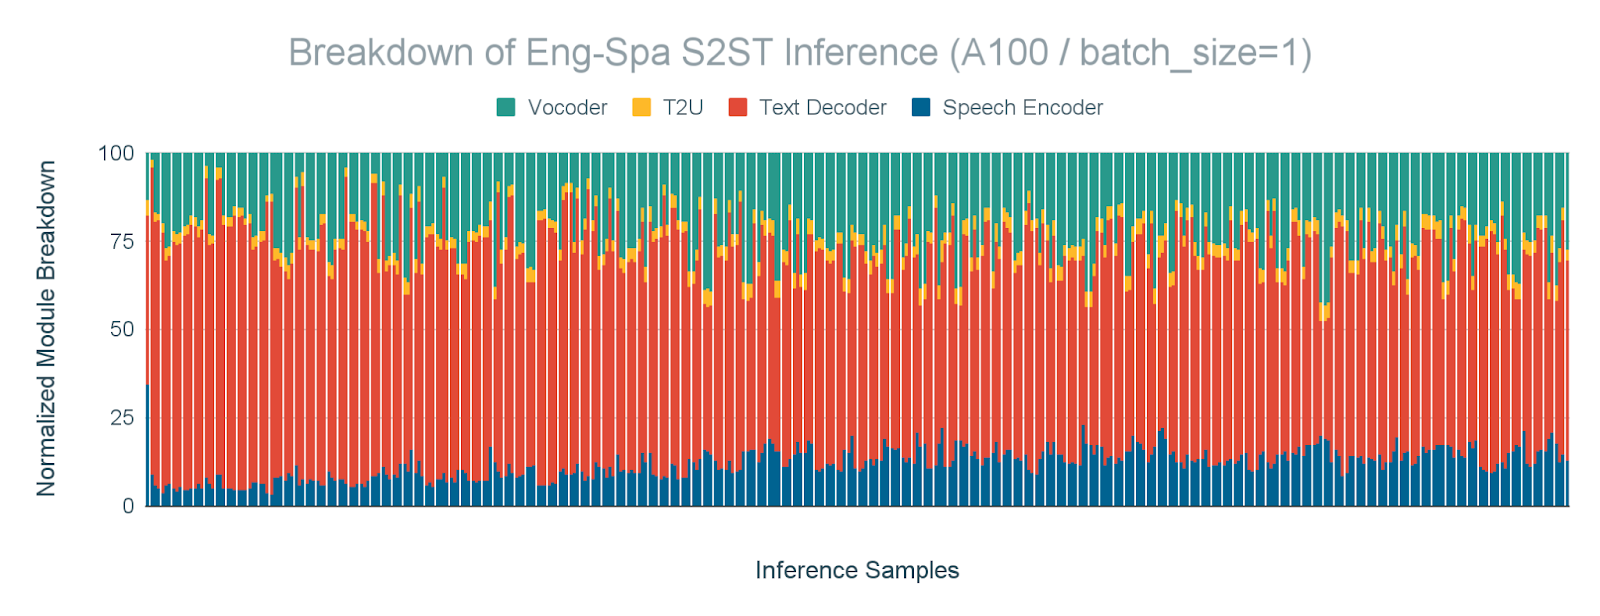 Text decoder and vocoder are the most time consuming module. Breakdown of inference time by modules for English-Spanish S2ST (Speech-to-Speech-Text) task for batch_size=1 on A100 GPU.